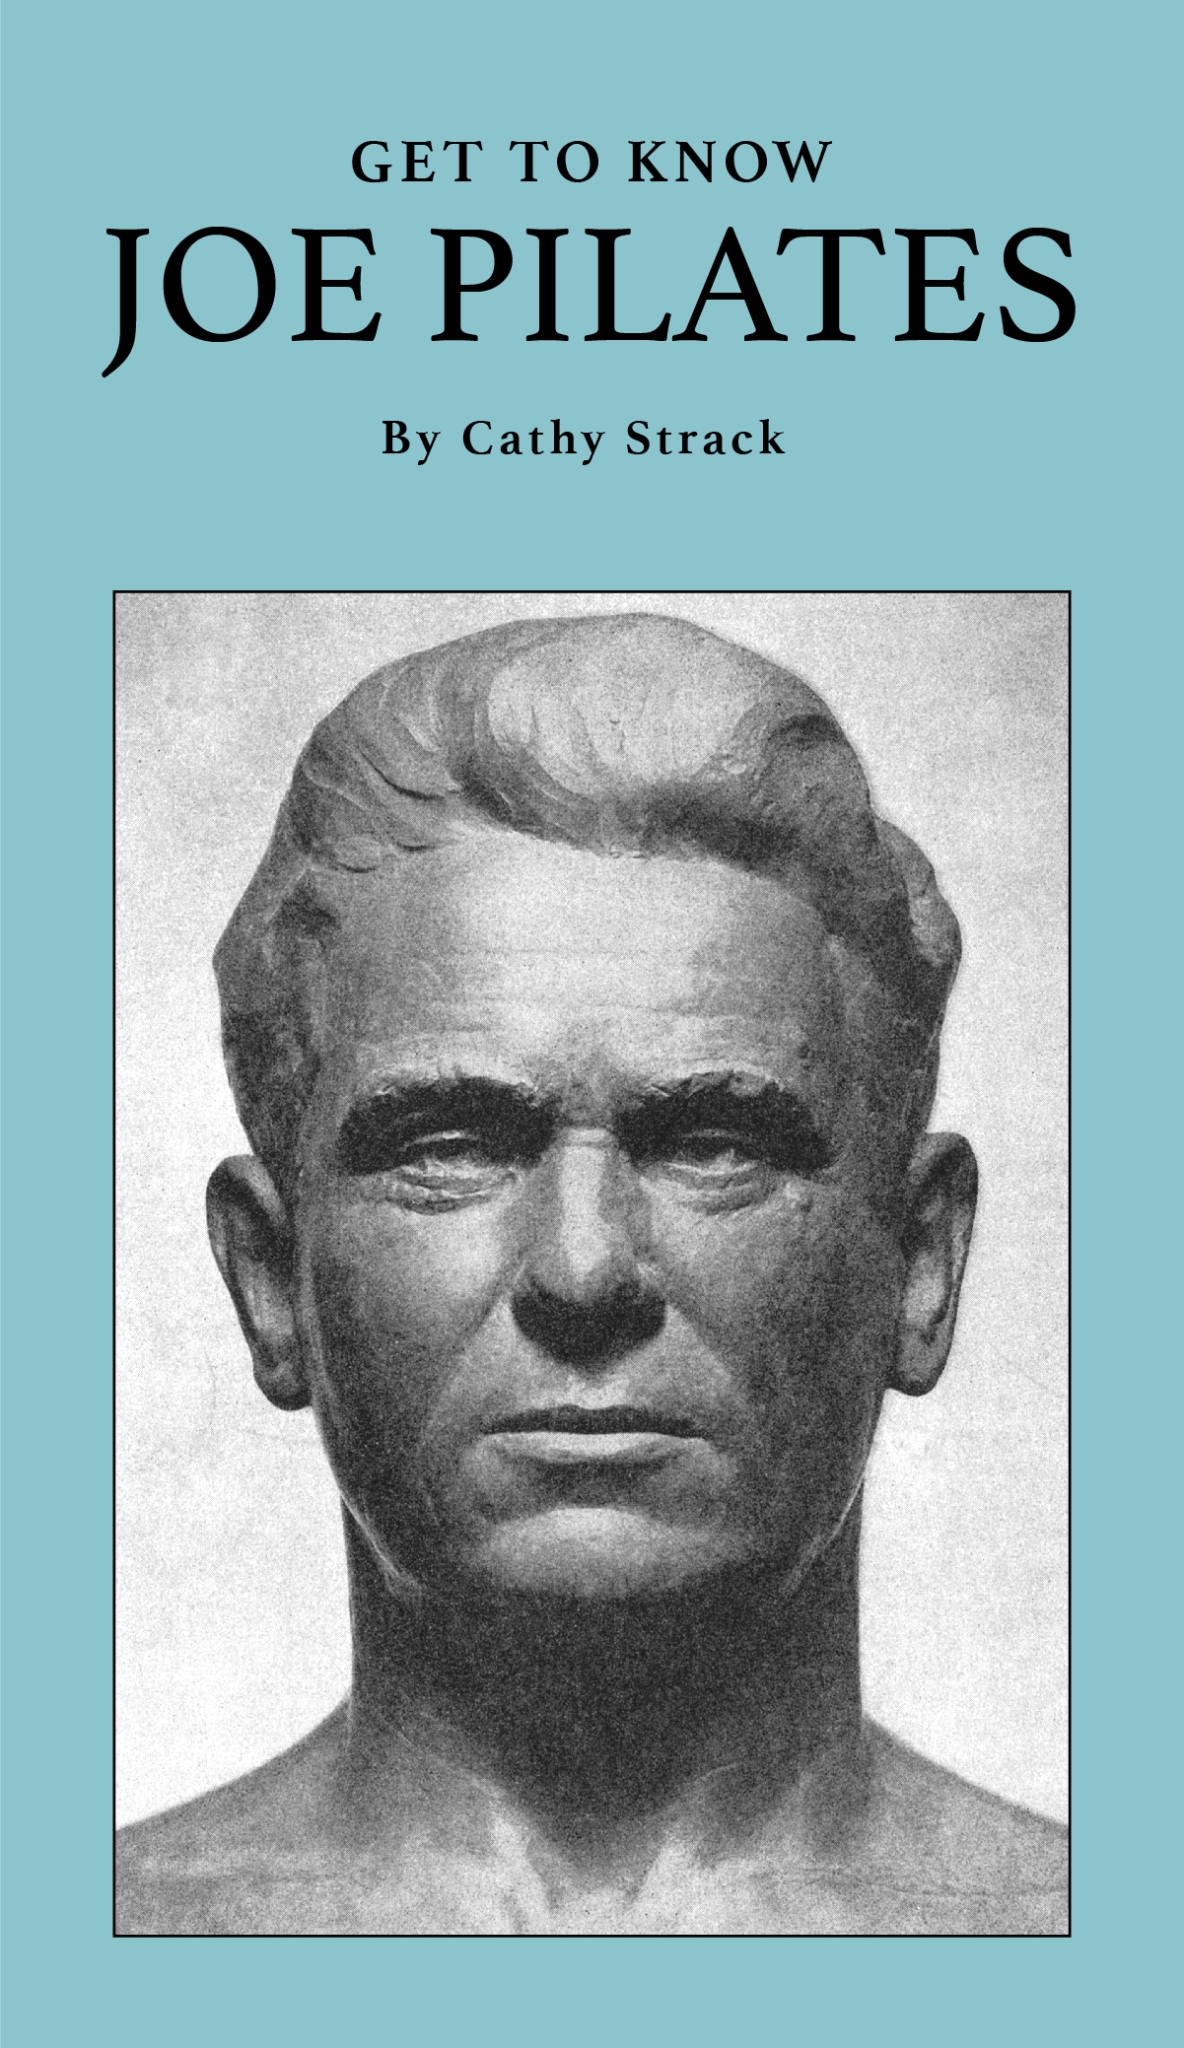 Get to Know Joe Pilates by Cathy Strack- A Book Review - JPilates teacher  training and education